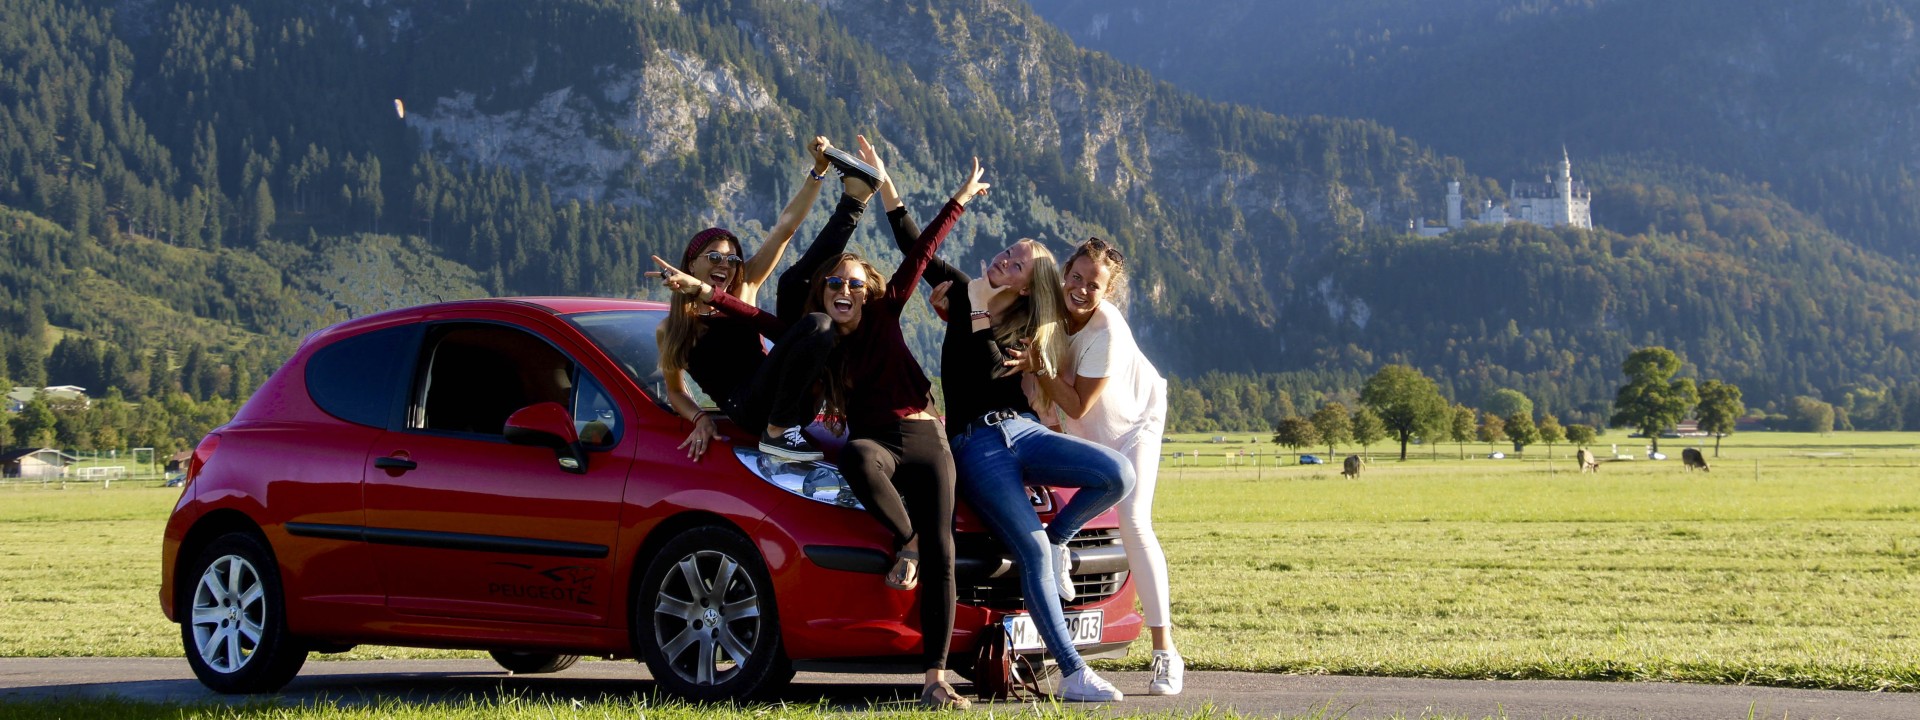 4 female students posing on the mask of a red small car, in the background a meadow, mountains and Neuschwanstein Castle